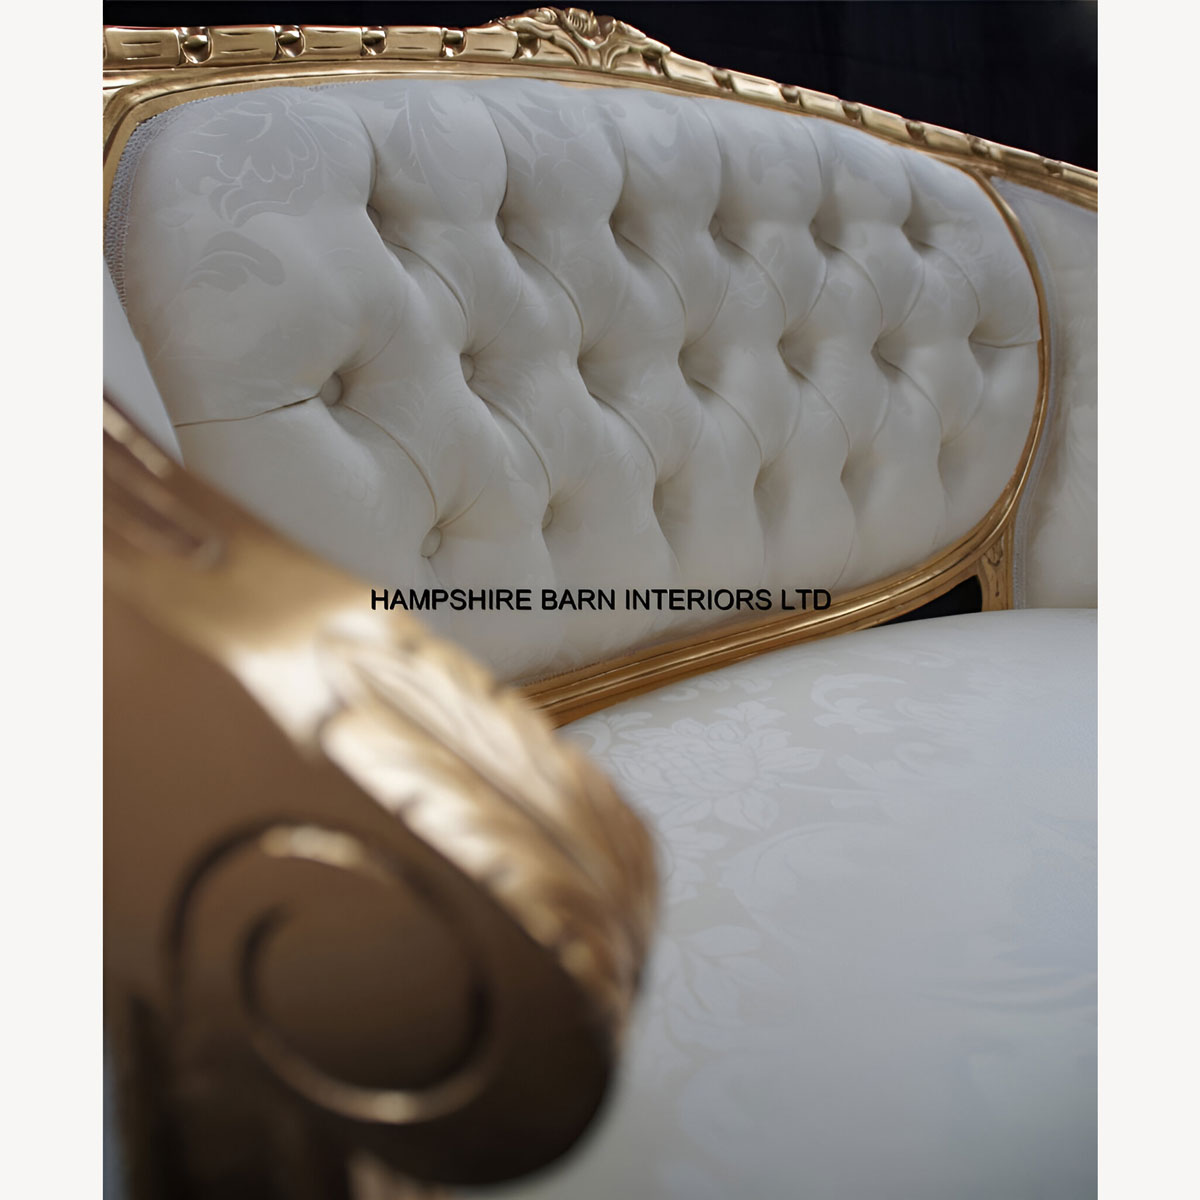 Double Ended Gold Ivory French Louis Ornate Chaise Longue Sofa Home Salon 4 - Hampshire Barn Interiors - Double Ended Gold Ivory French Louis Ornate Chaise Longue Sofa Home Salon -